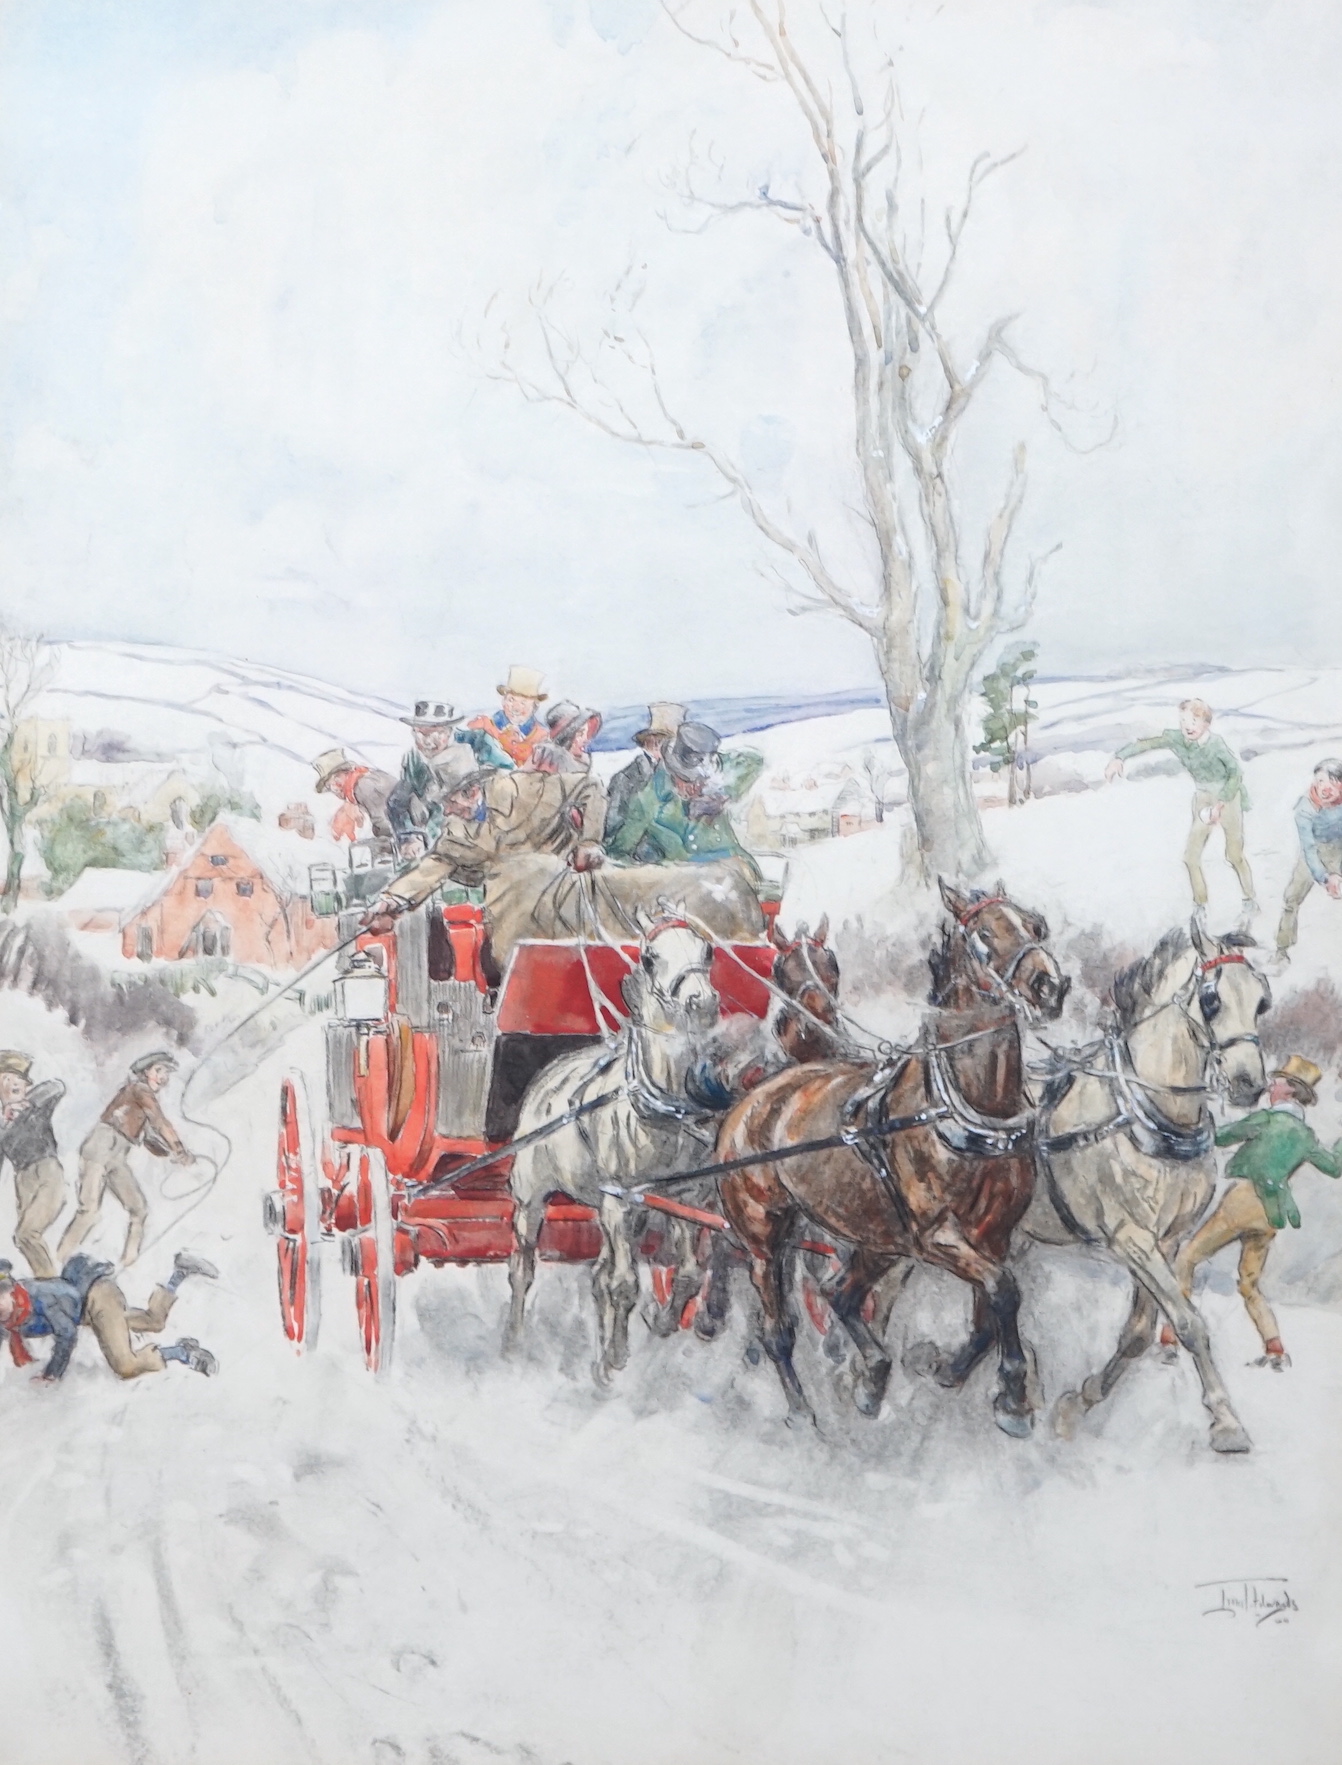 Lionel Edwards (English, 1878-1966), 'Snowballing the stagecoach', watercolour, 49 x 38cm